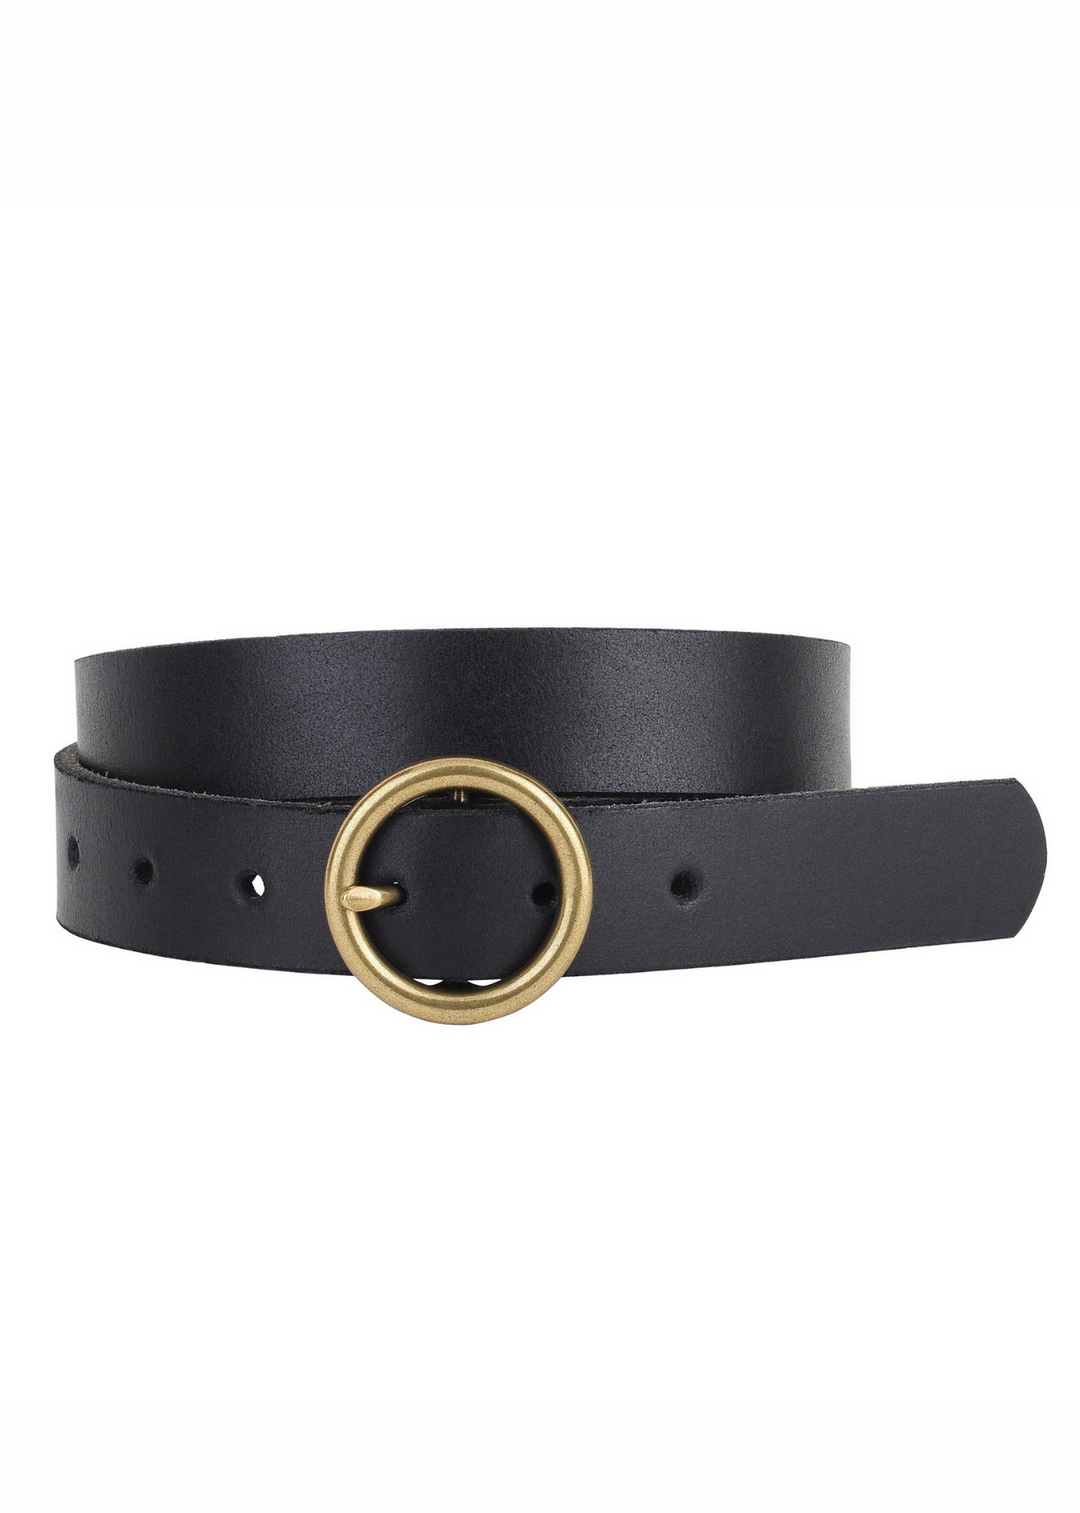 Most Wanted 1" Single Ring Belt (Black)